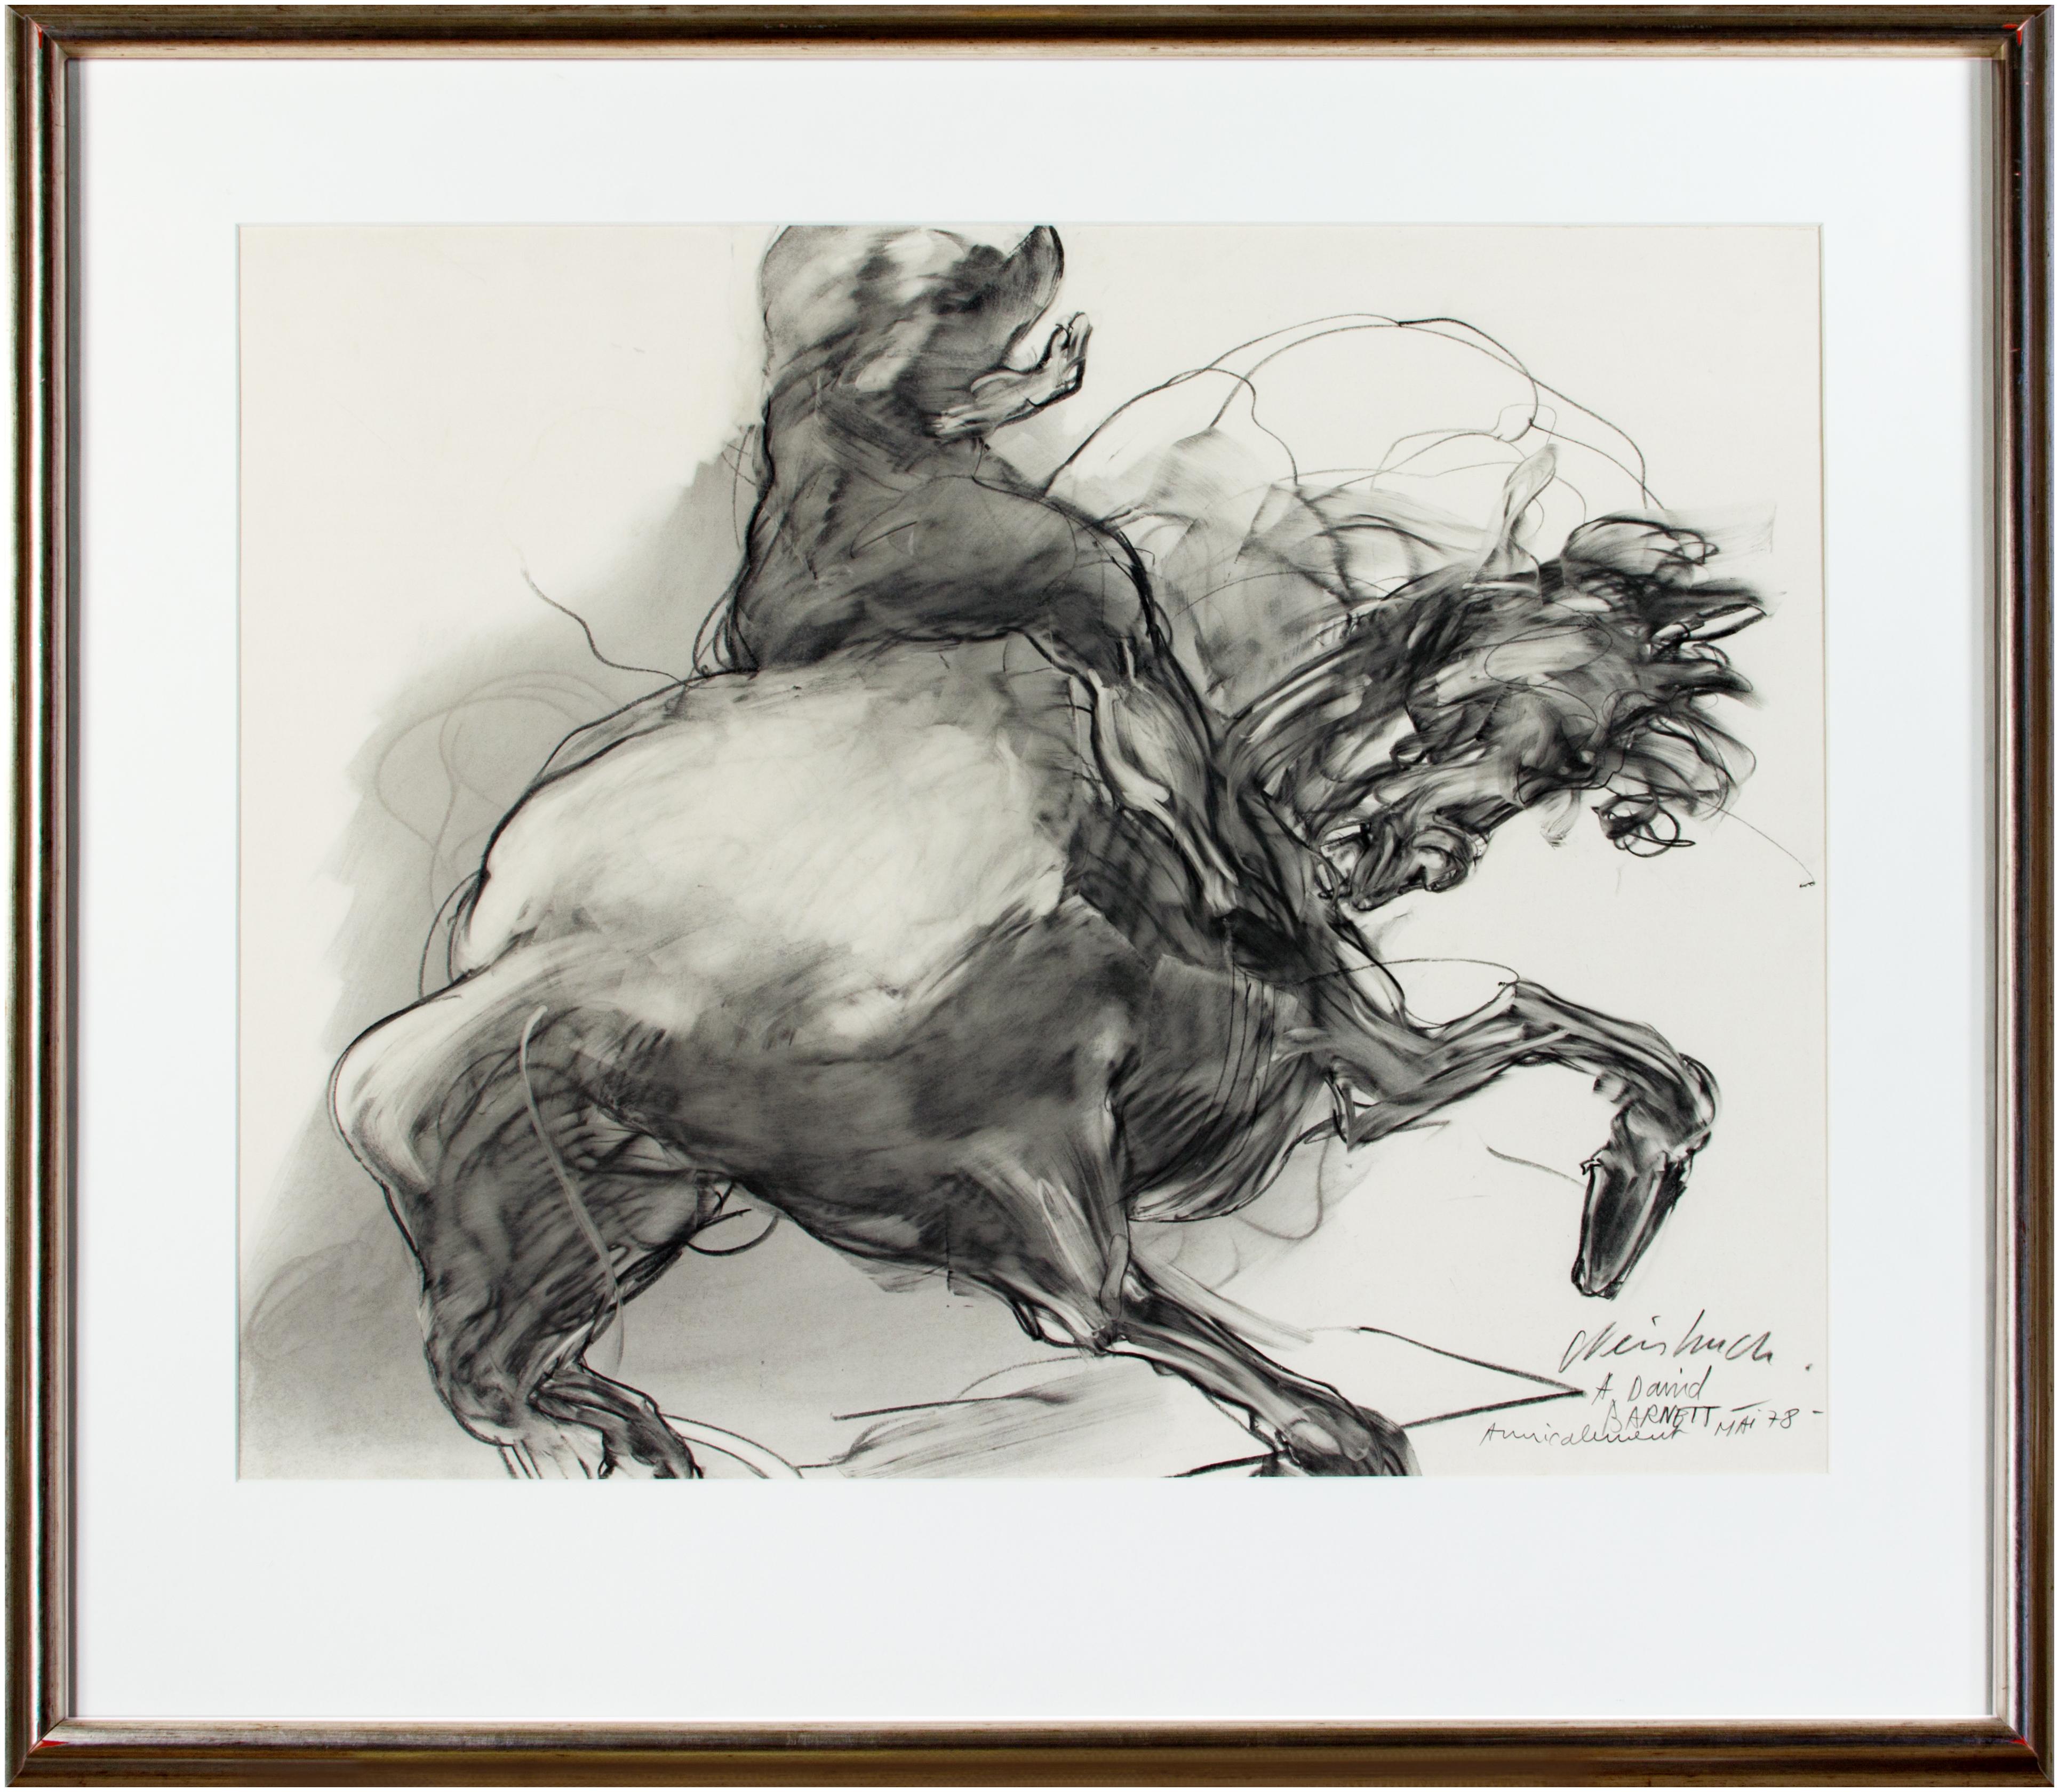 Claude Weisbuch Figurative Art - 'Horseman' charcoal on paper, signed and dated